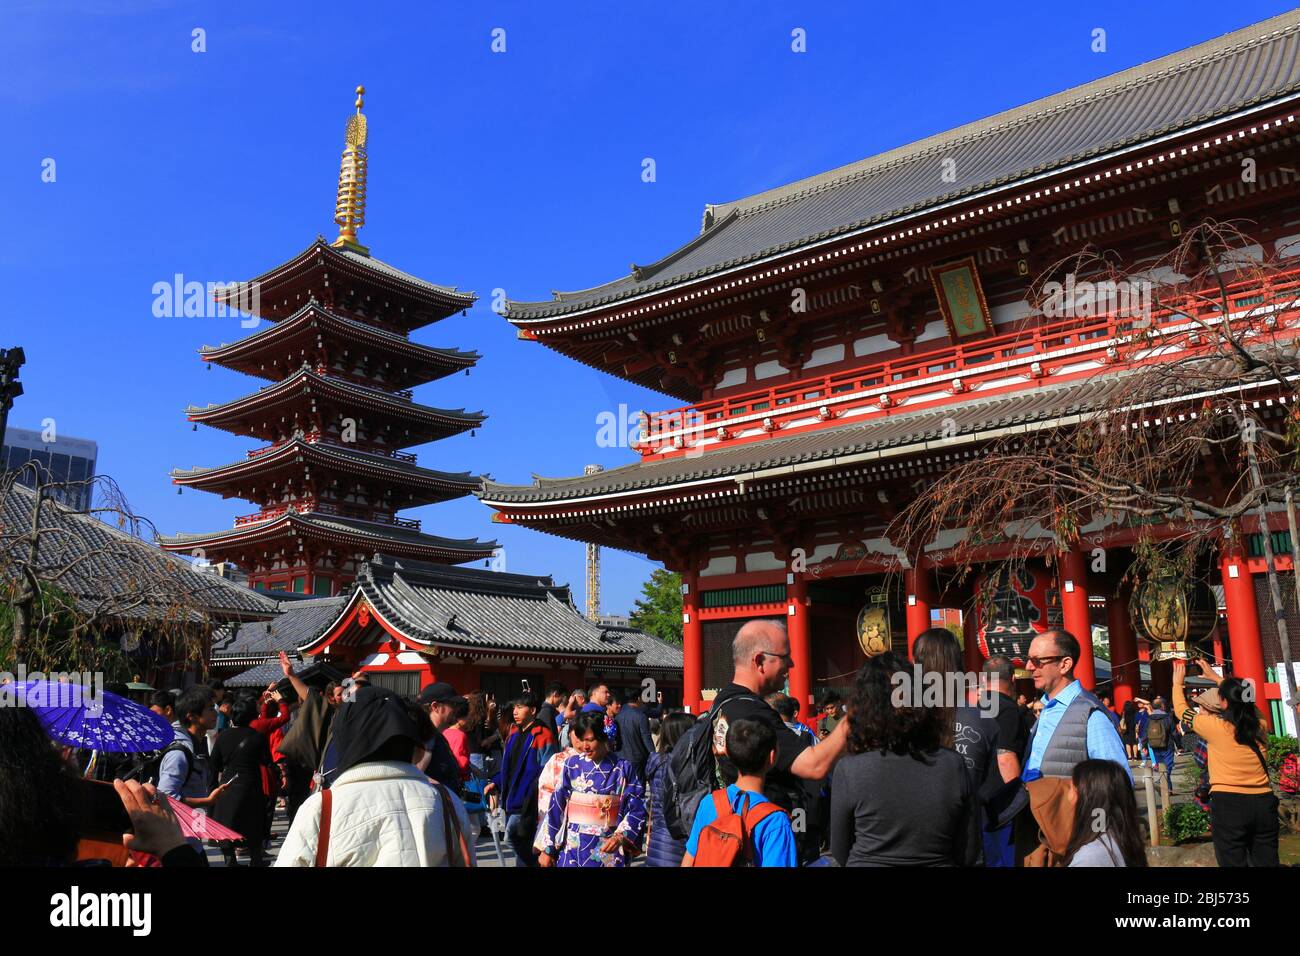 Scenery of Asakusa Sensoji Temple, a famous tourist attraction in Tokyo that is crowded with many people Stock Photo